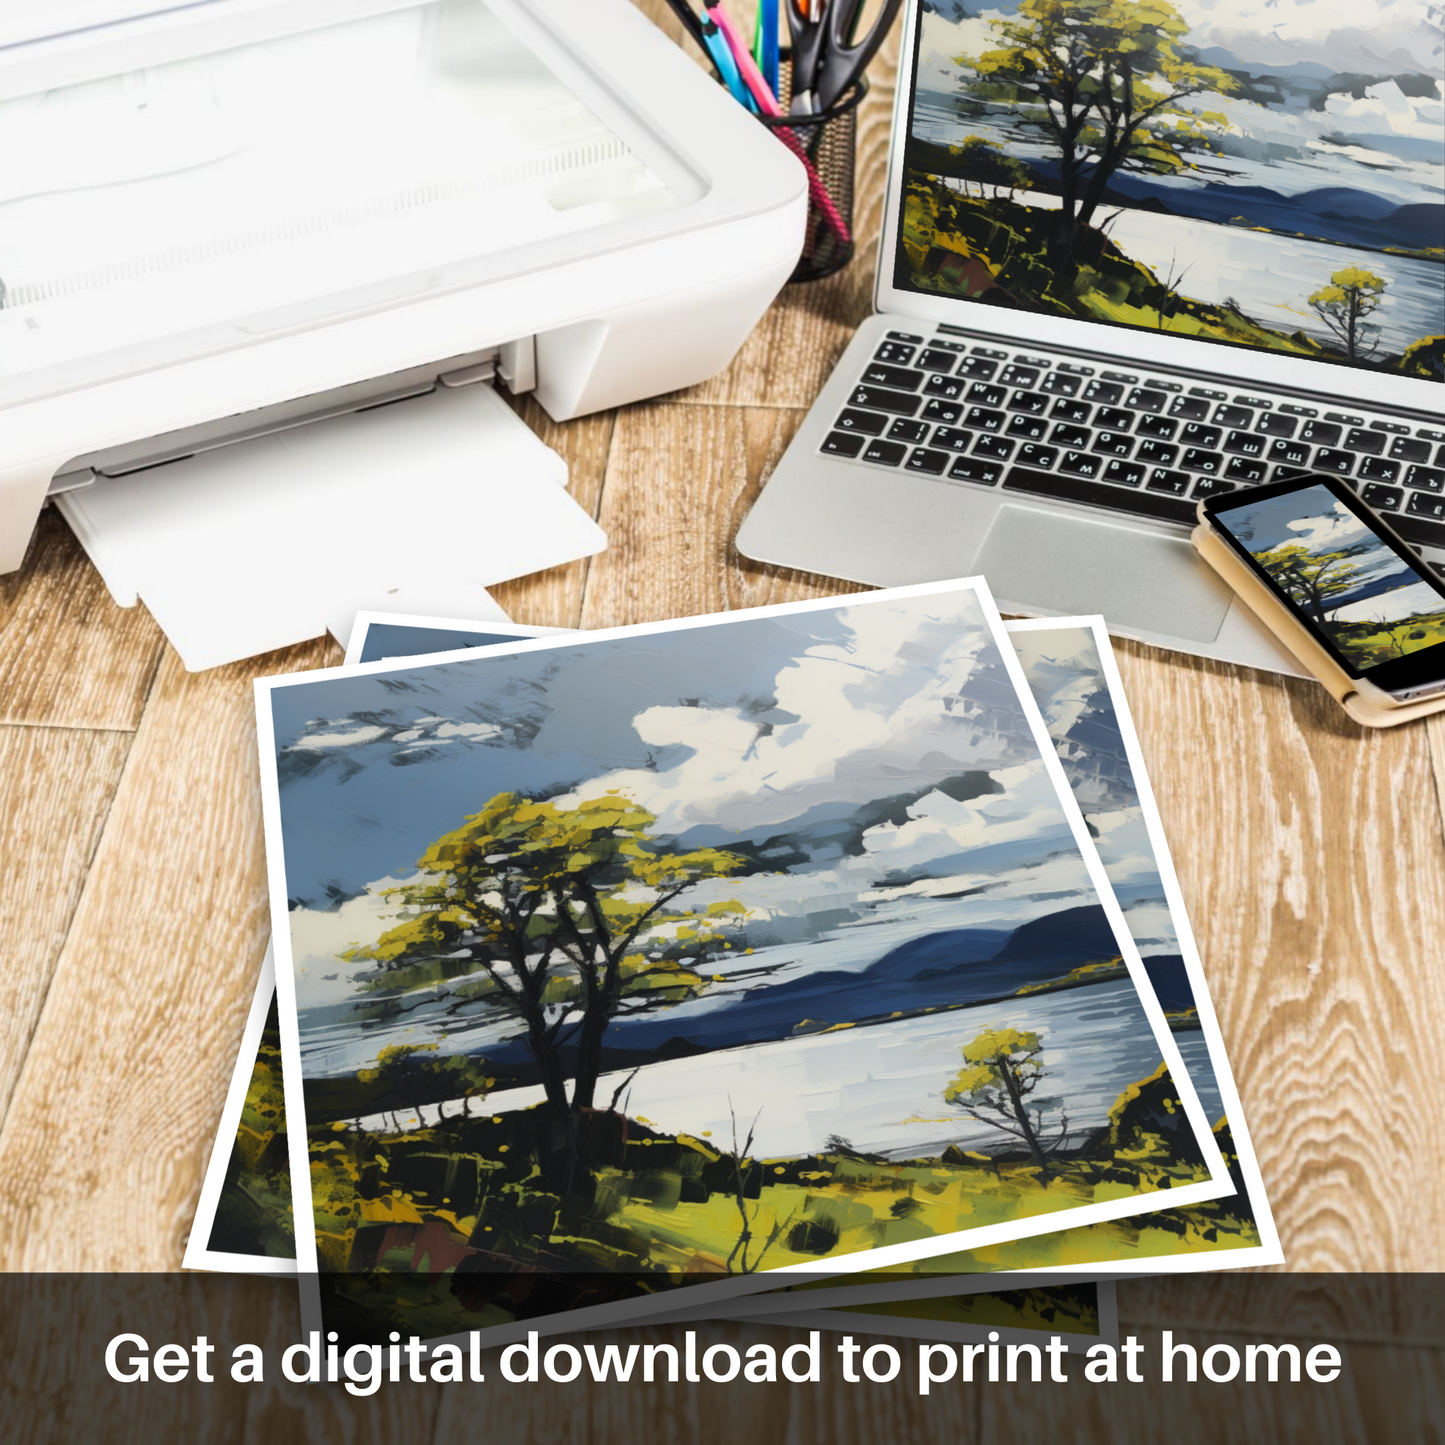 Downloadable and printable picture of Loch Lomond in summer